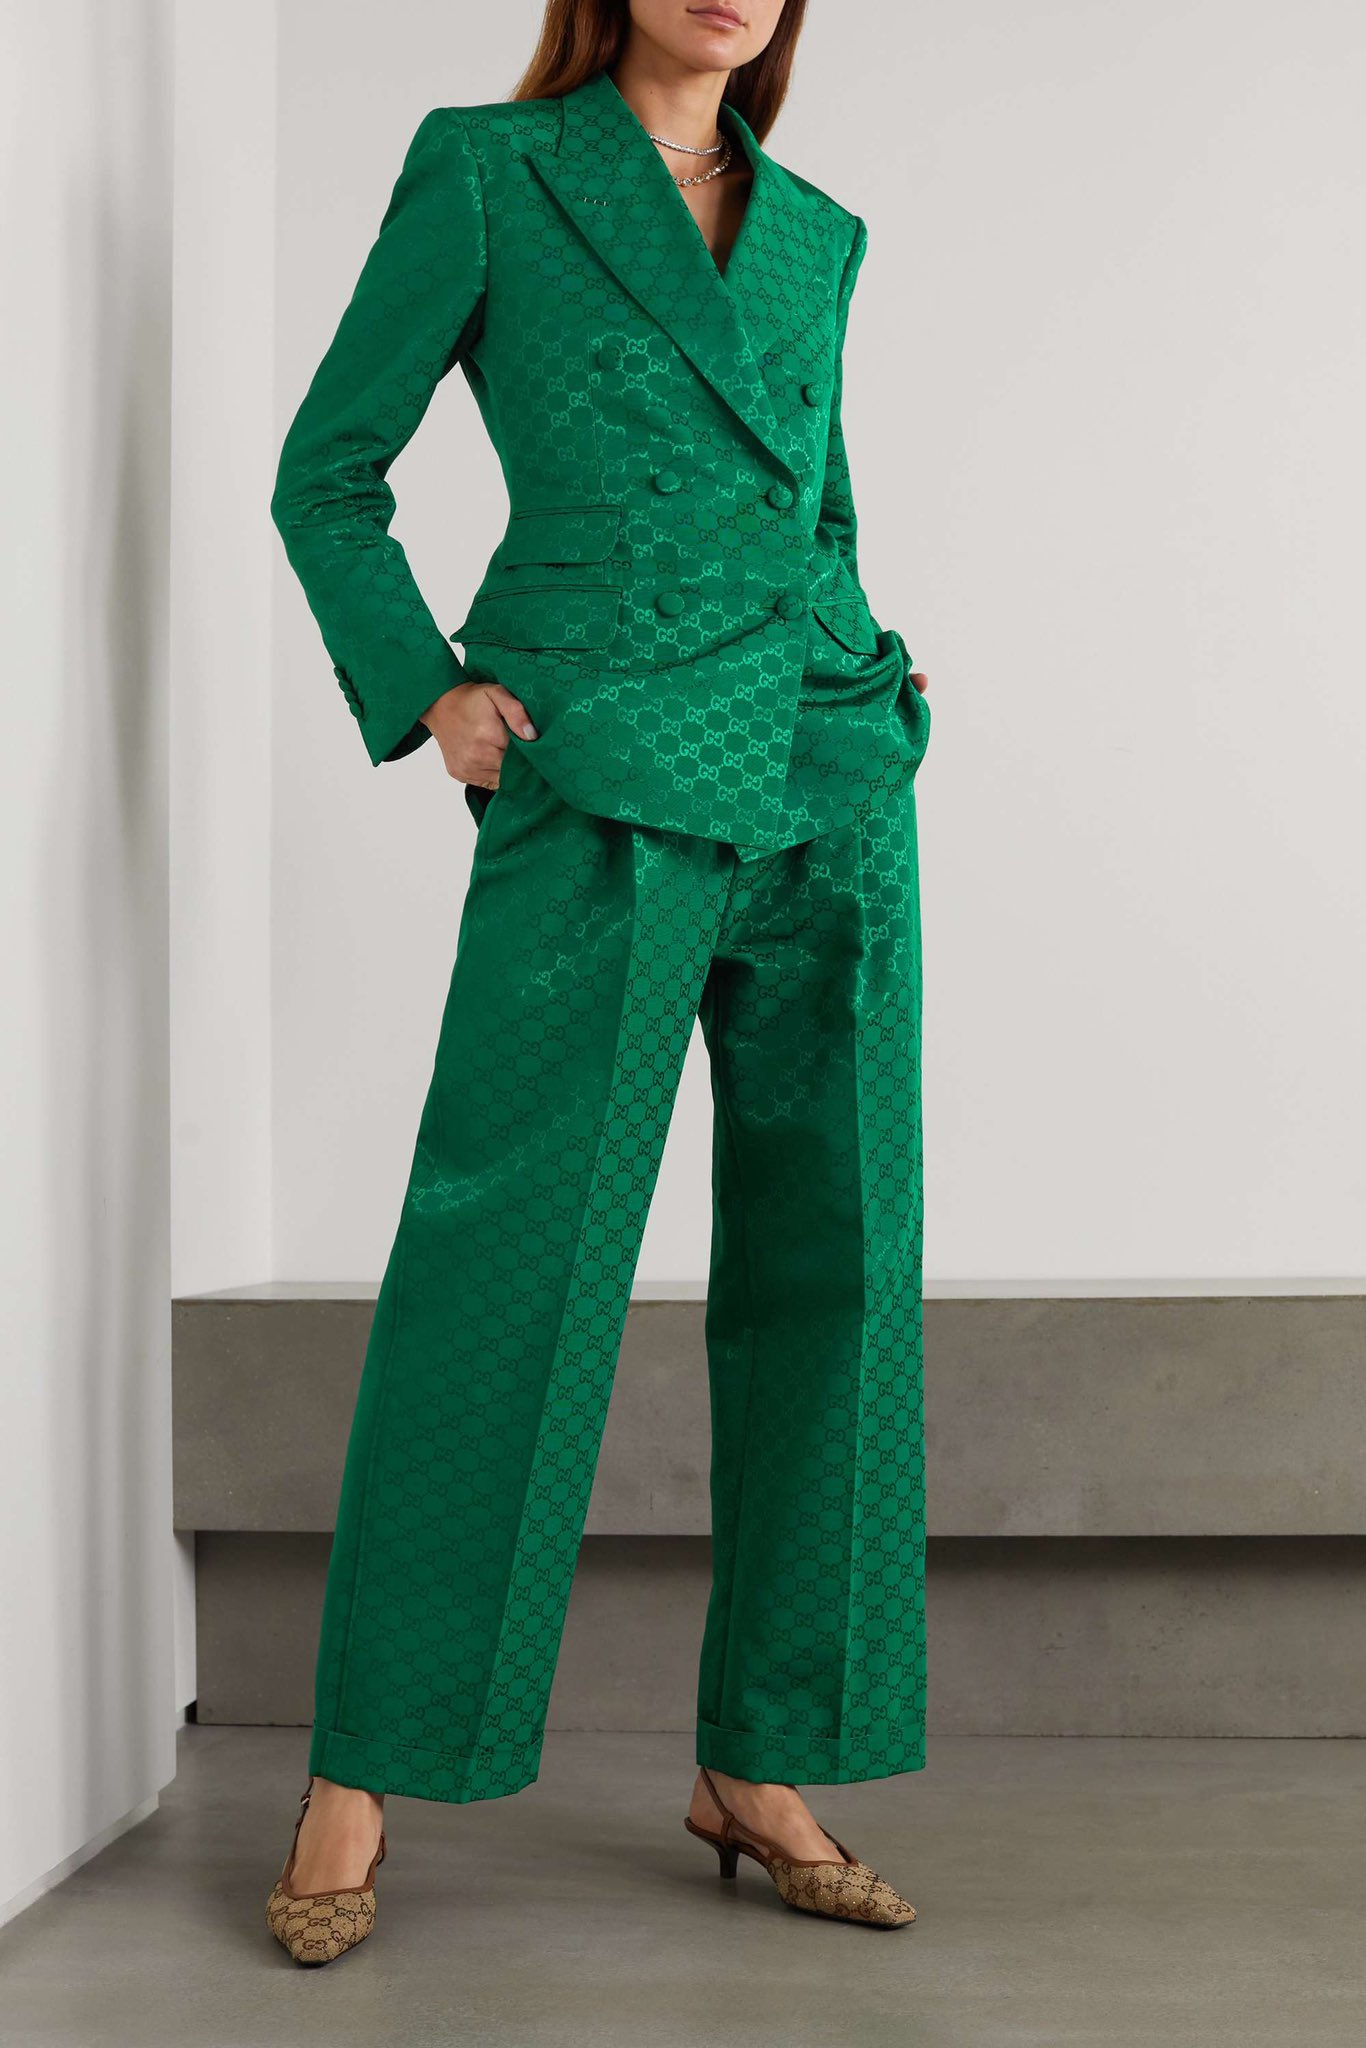 lucy ford 🍊 on X: "i'm sick pls send me this green suit to feel better @ gucci https://t.co/GJCo8aedi1" / X